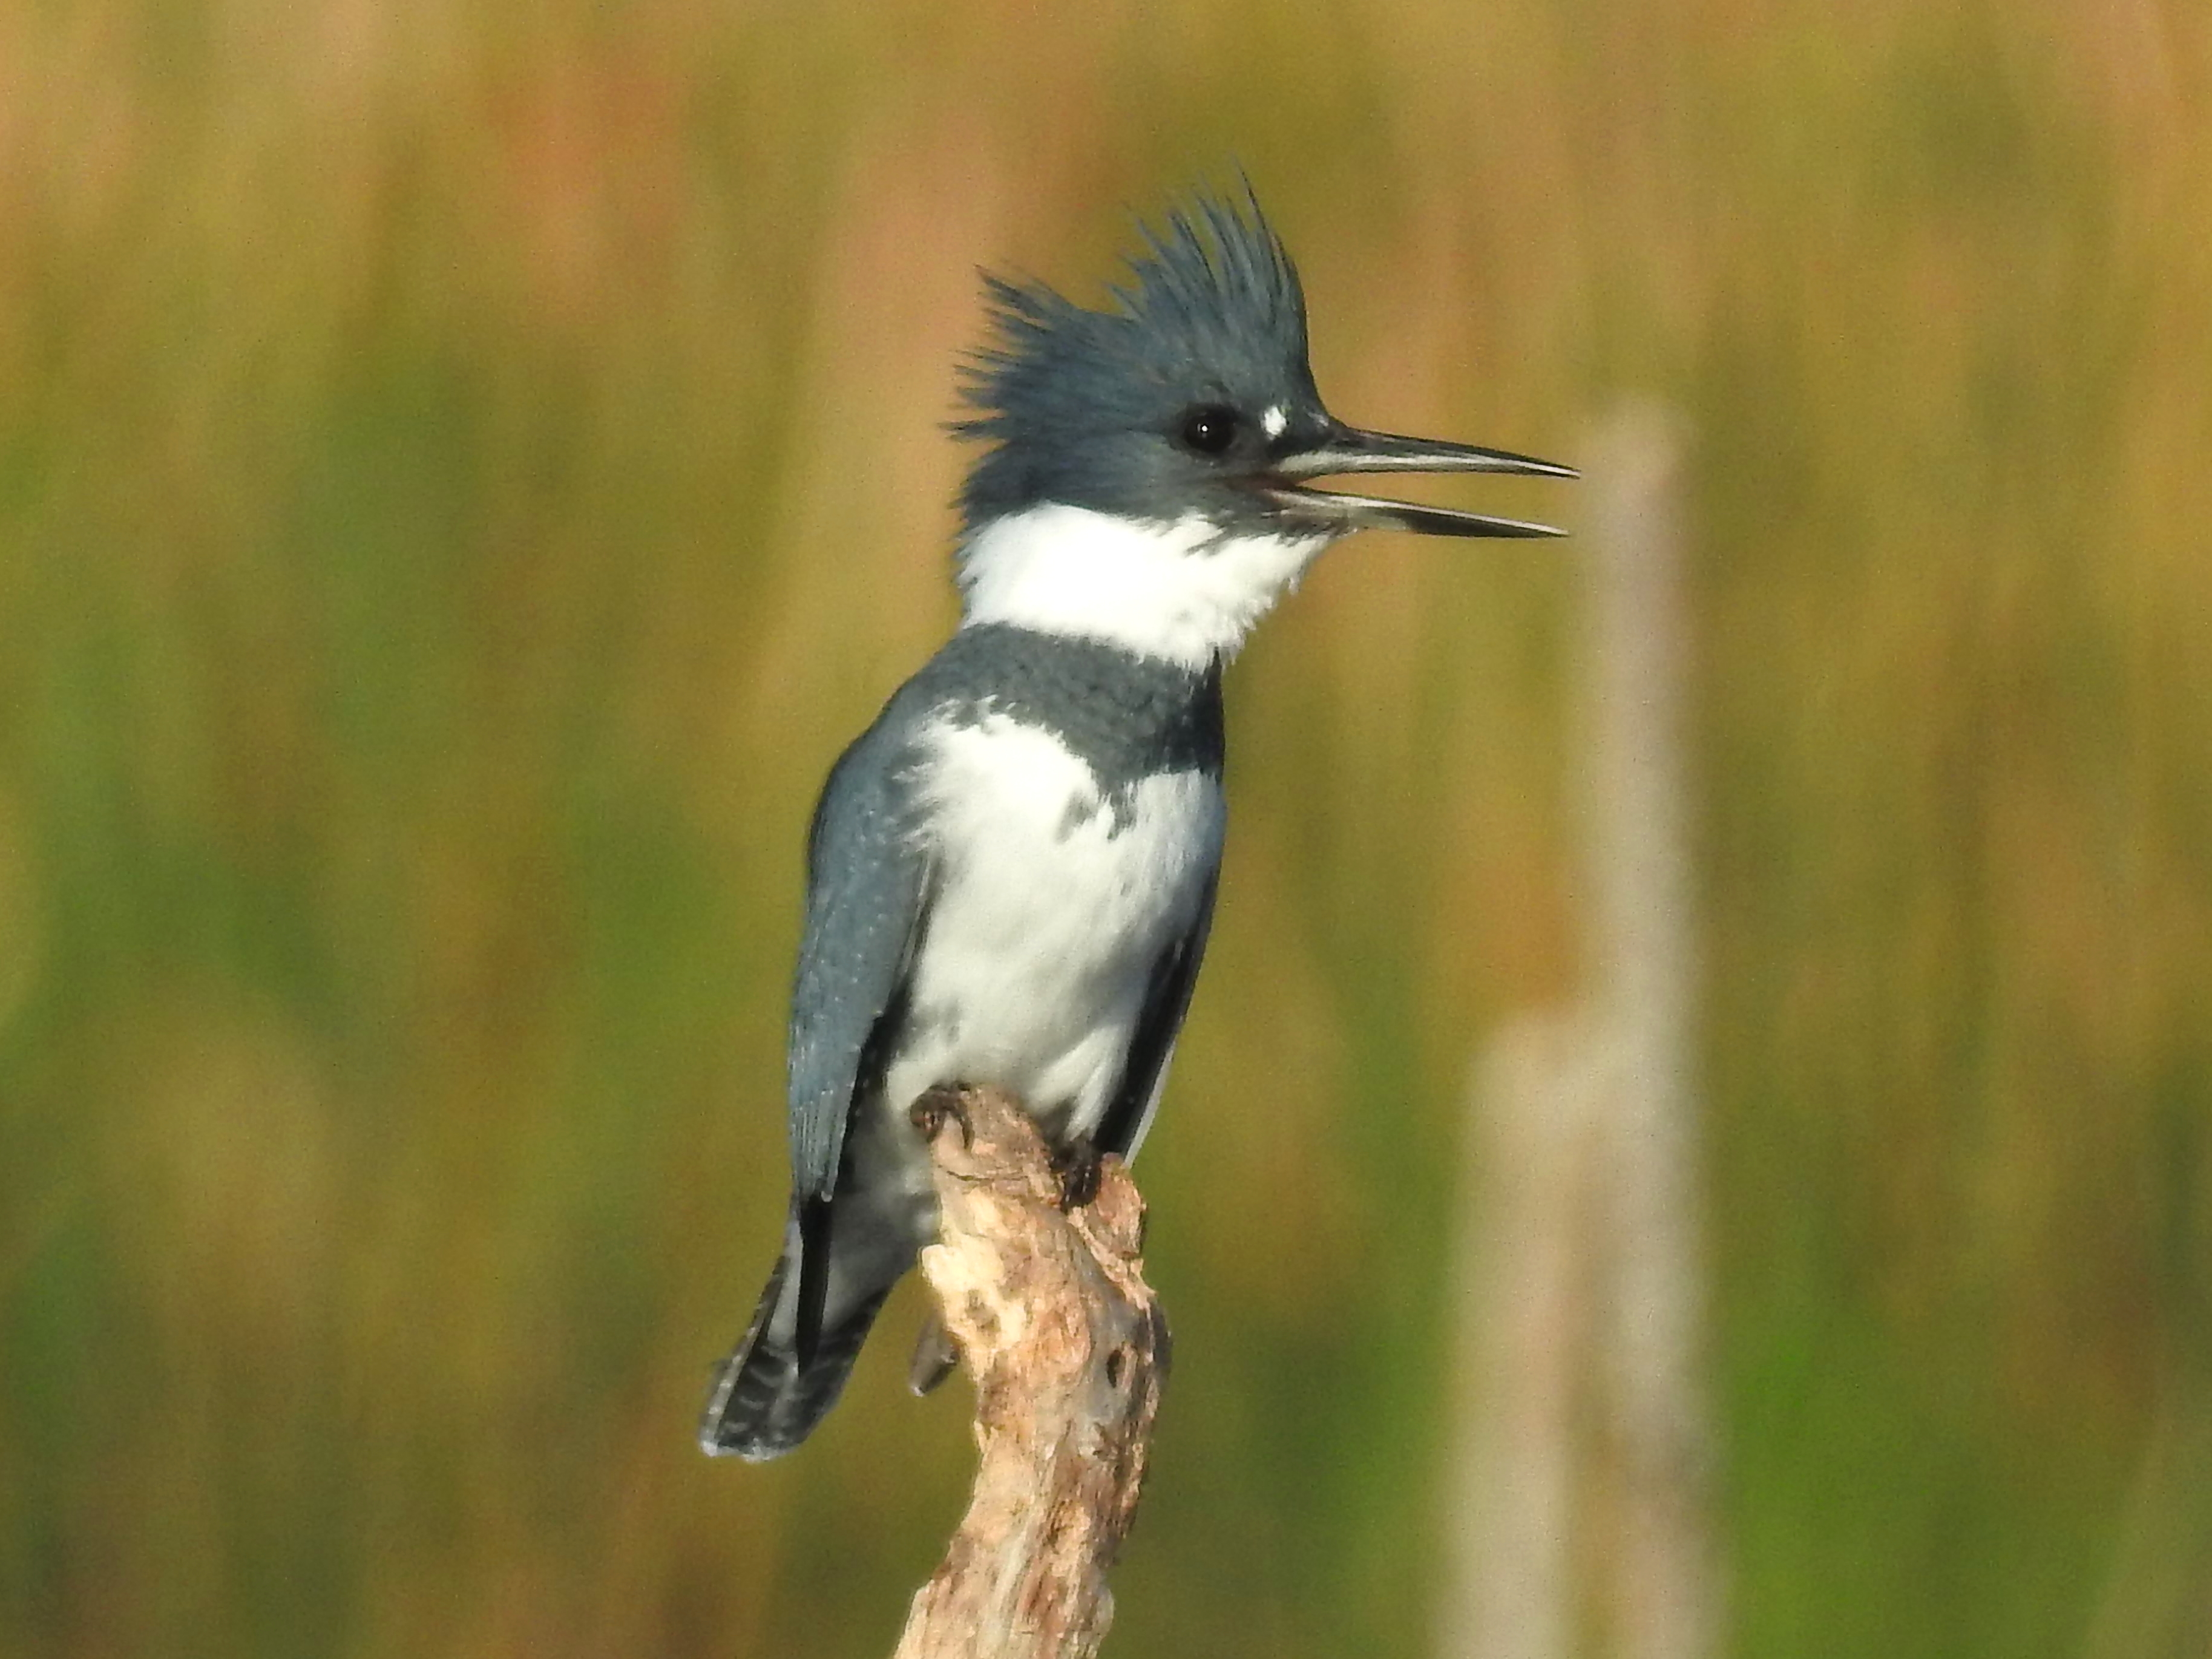 National Audubon Society - The Belted Kingfisher is one of the